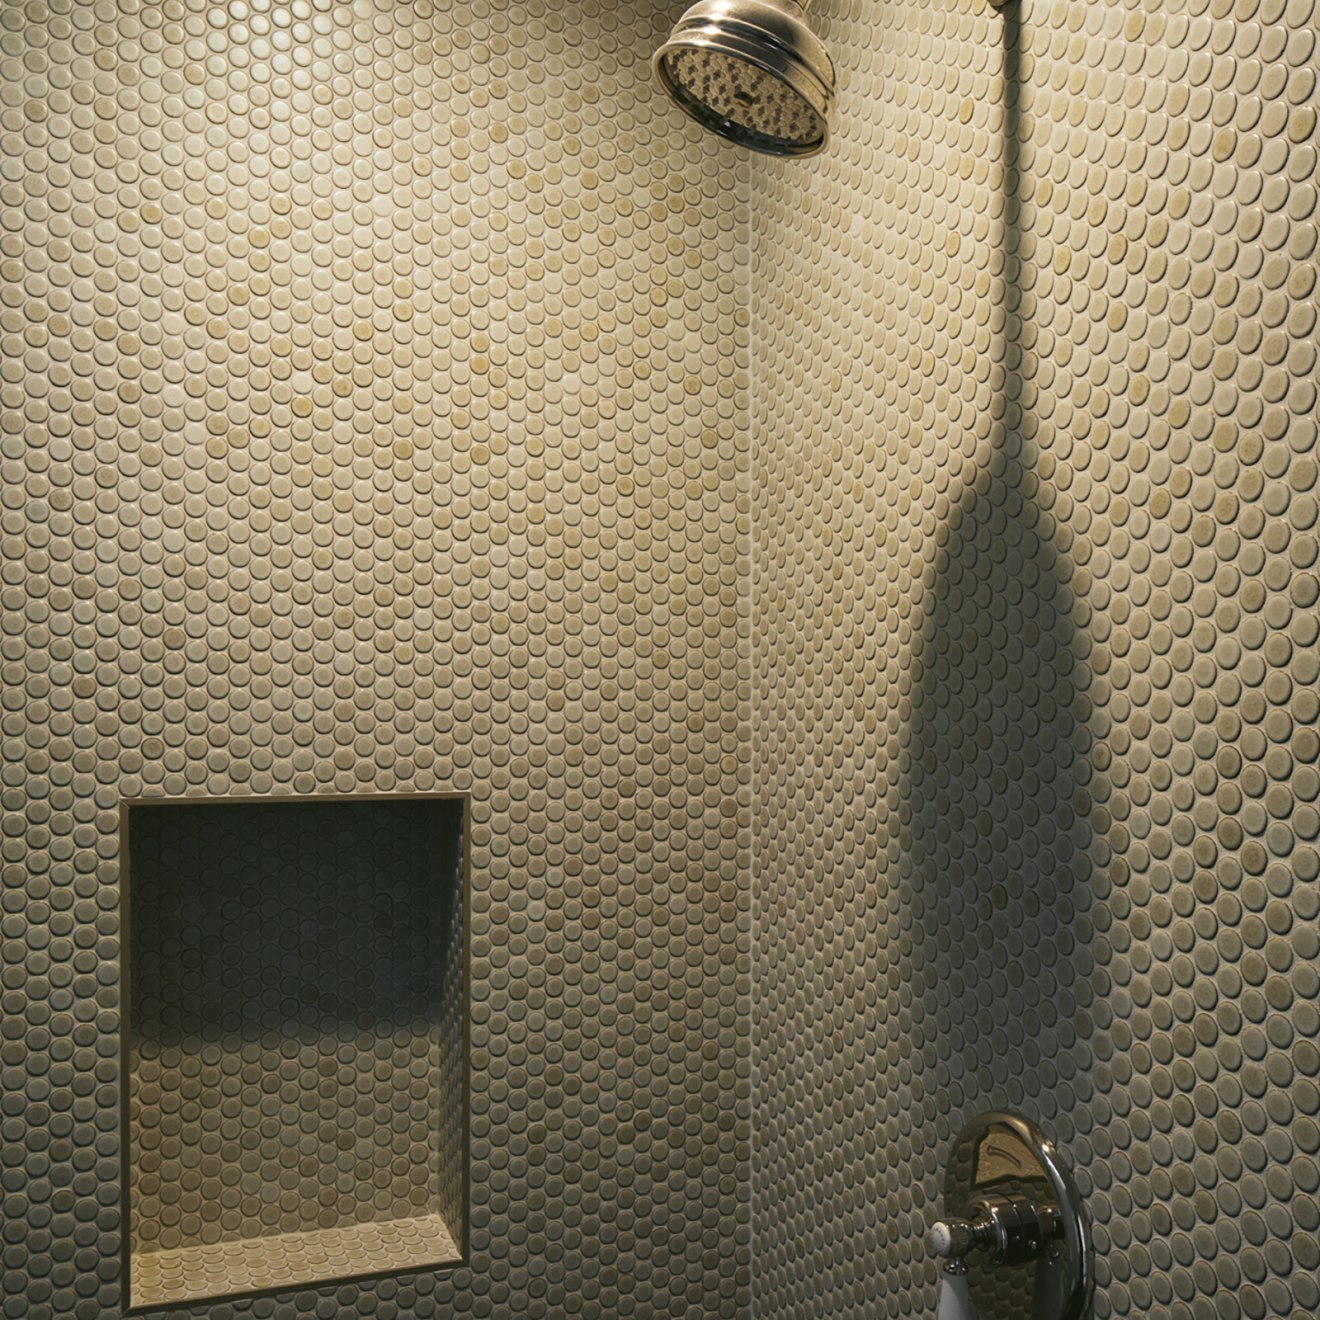 Beige penny round tile lining shower wall.